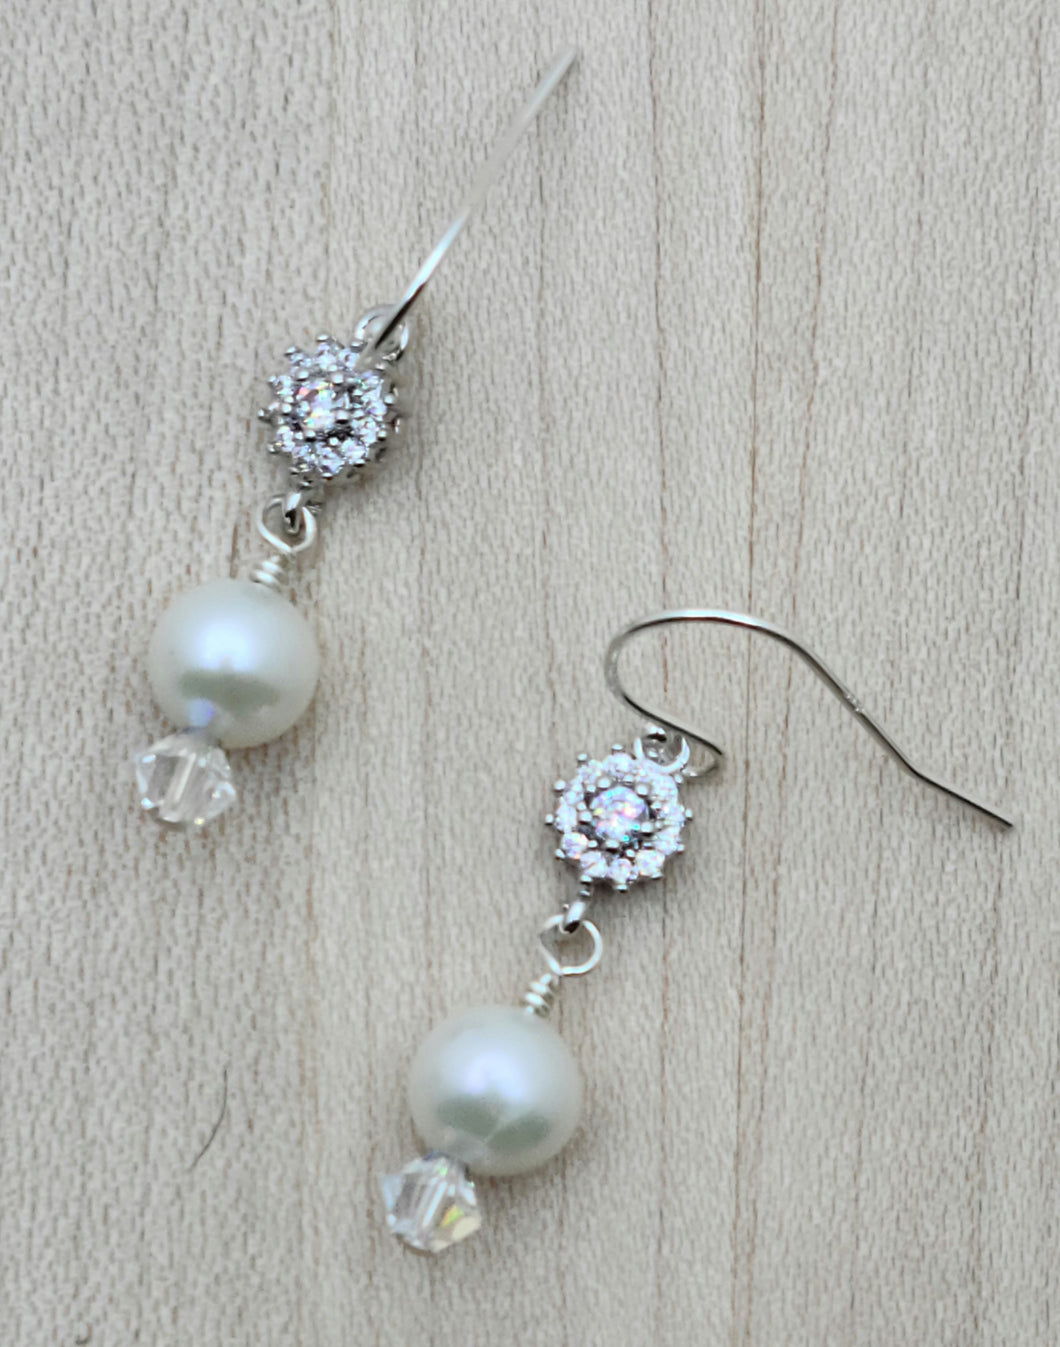 If you're looking for sweet, simple, freshwater pearls with a tiny bit of bling, these jewels are for you!